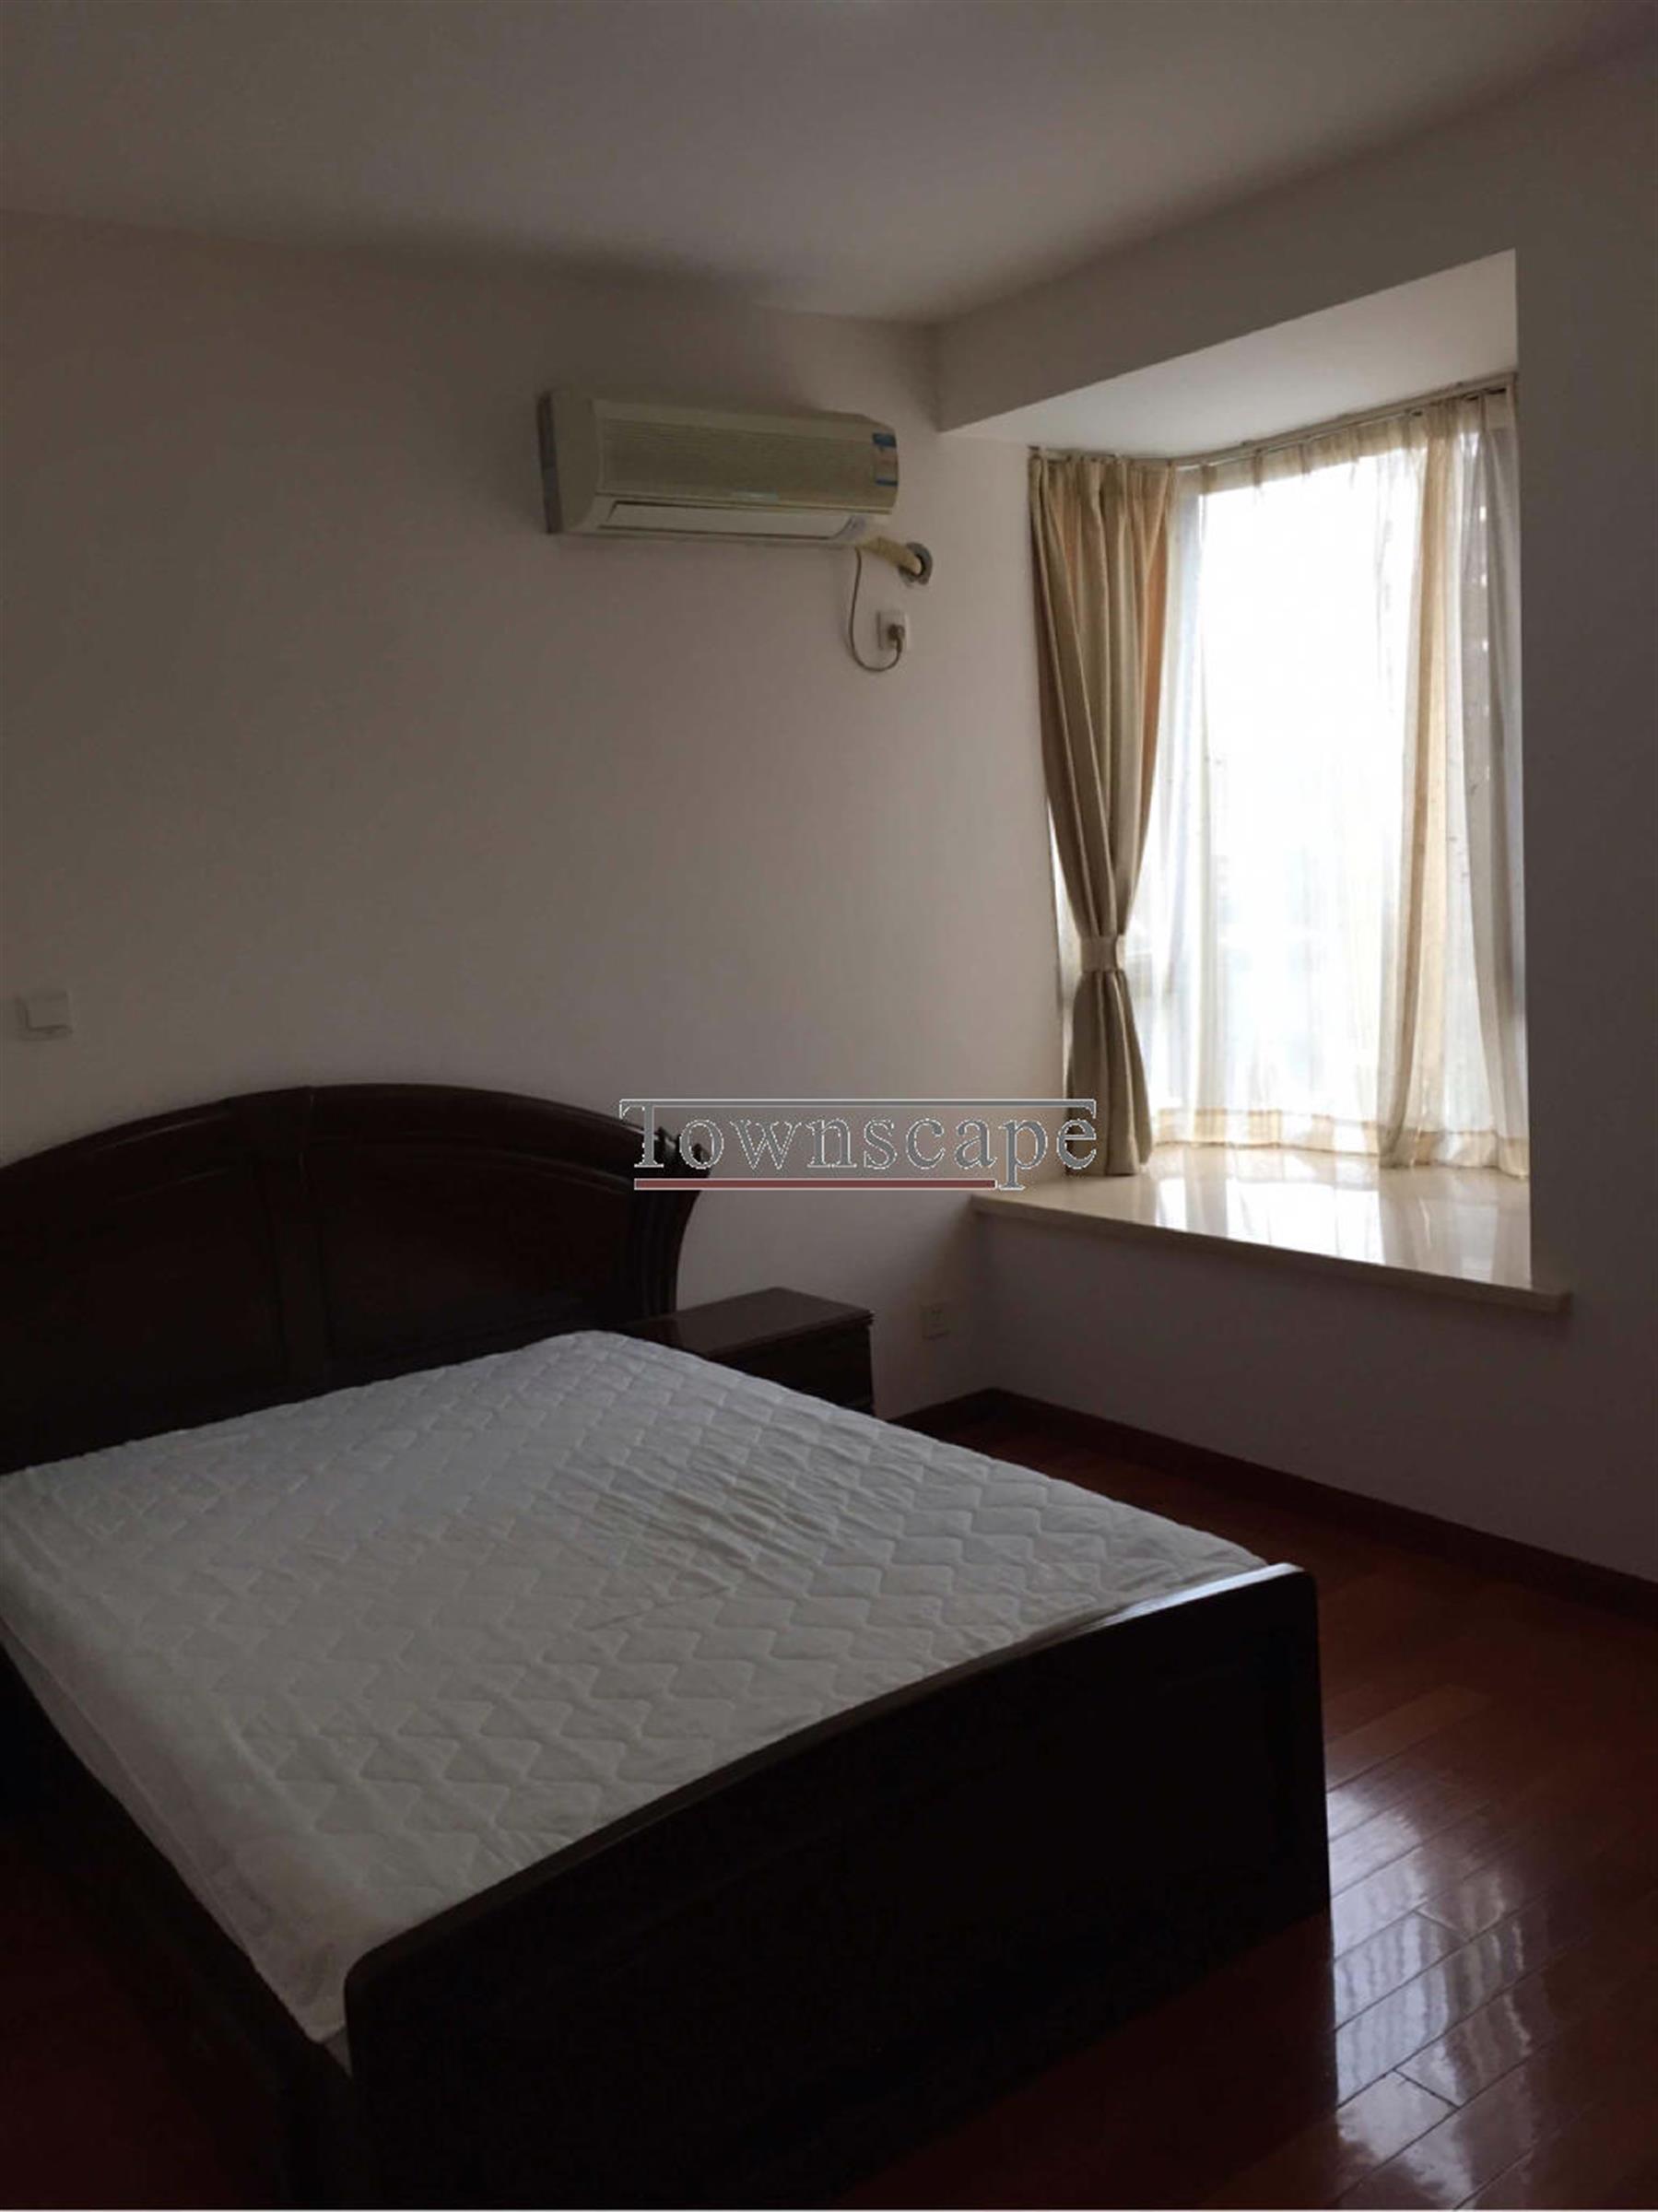 Large Bay Windows Large Size, Great Price Apt nr Zoo for Rent in Hongqiao, Shanghai